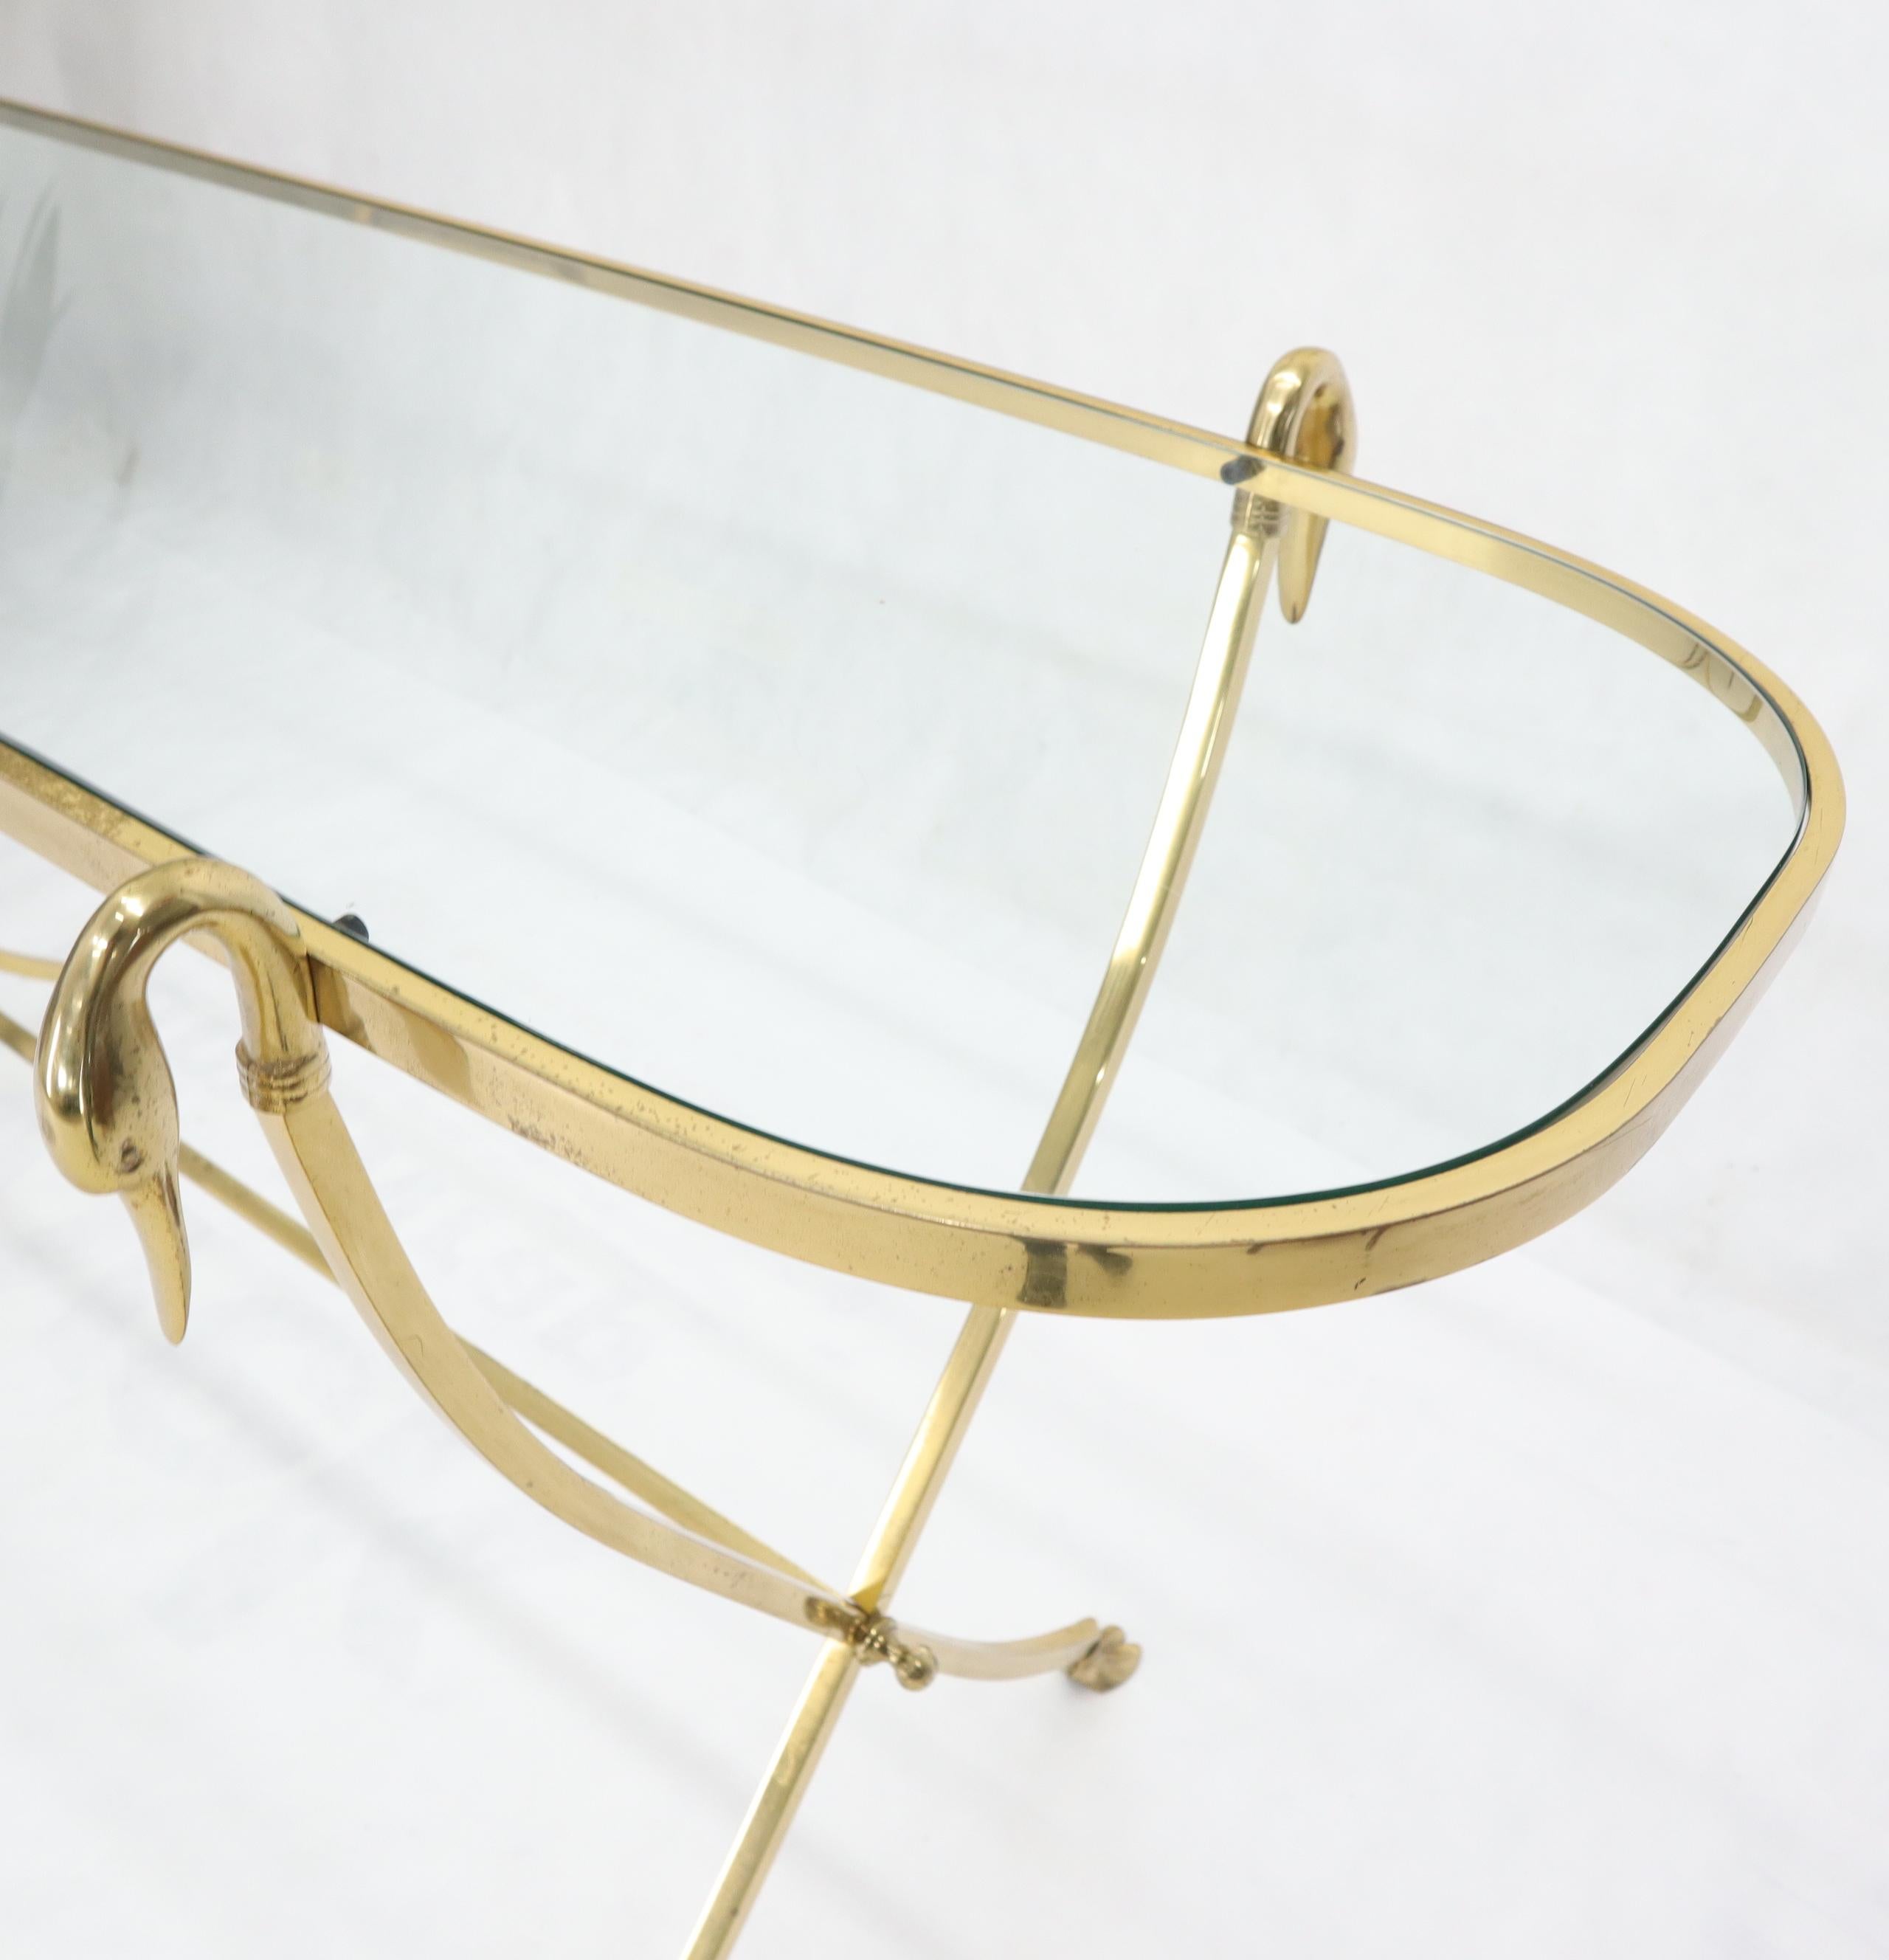 Oval Racetrack Top Shape Solid Brass Console Table with Swan Motive Finials 1